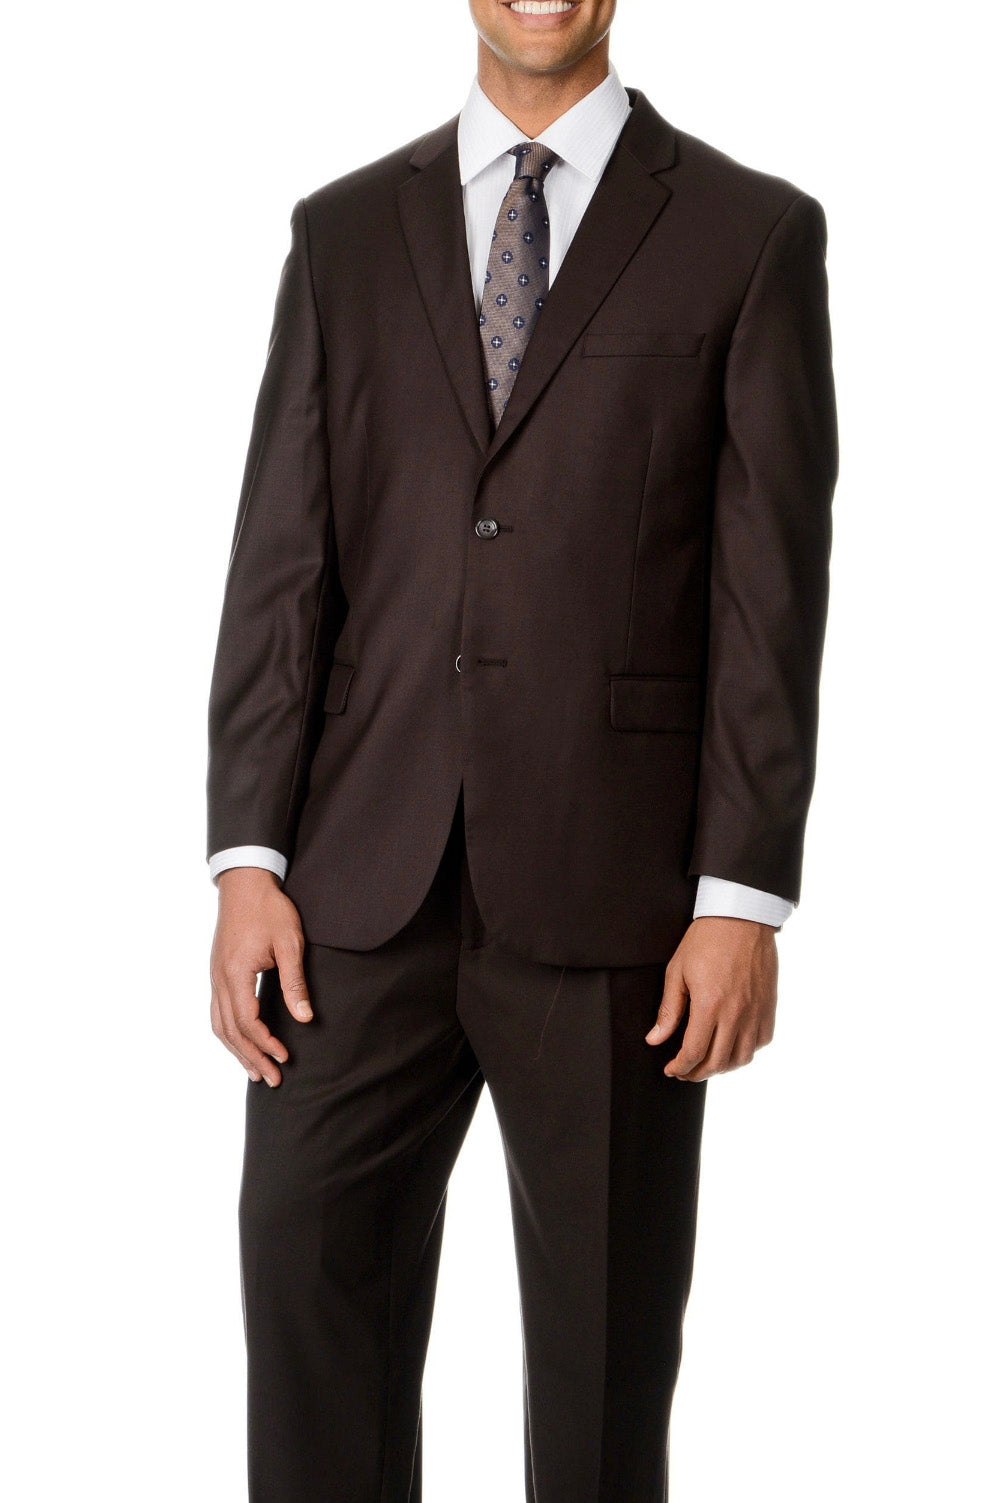 Caravelli Caravelli Solid Brown Suit